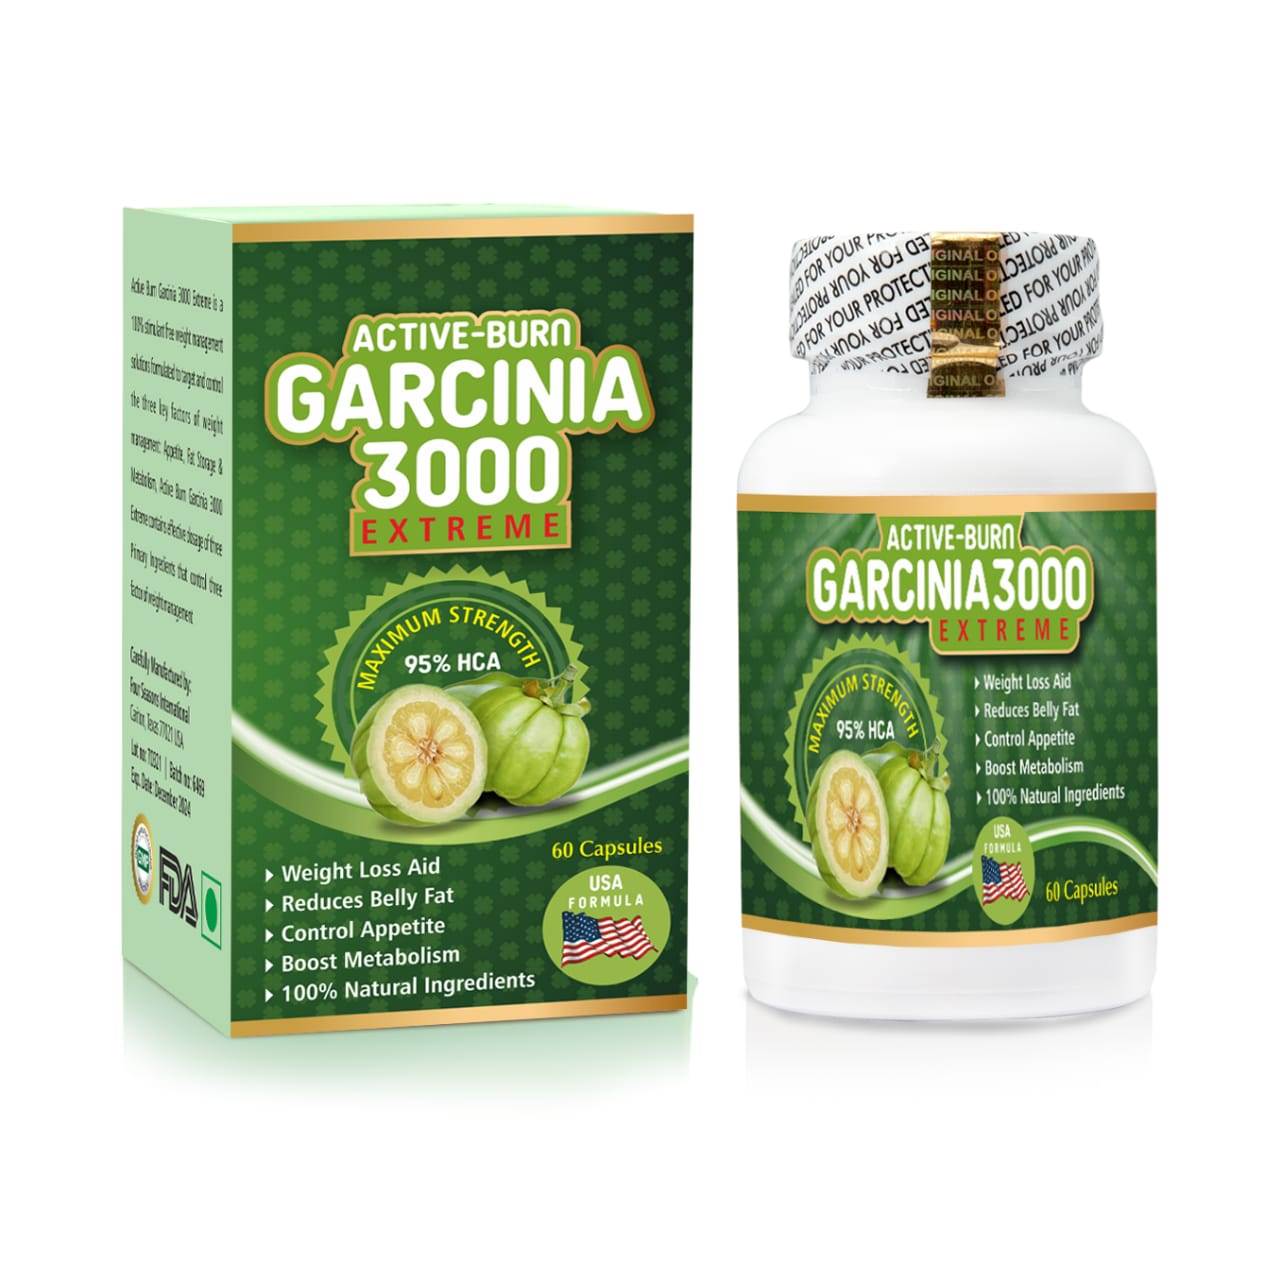 Active Burn Garcinia 3000 Extreme Weight Loss Capsules reviews